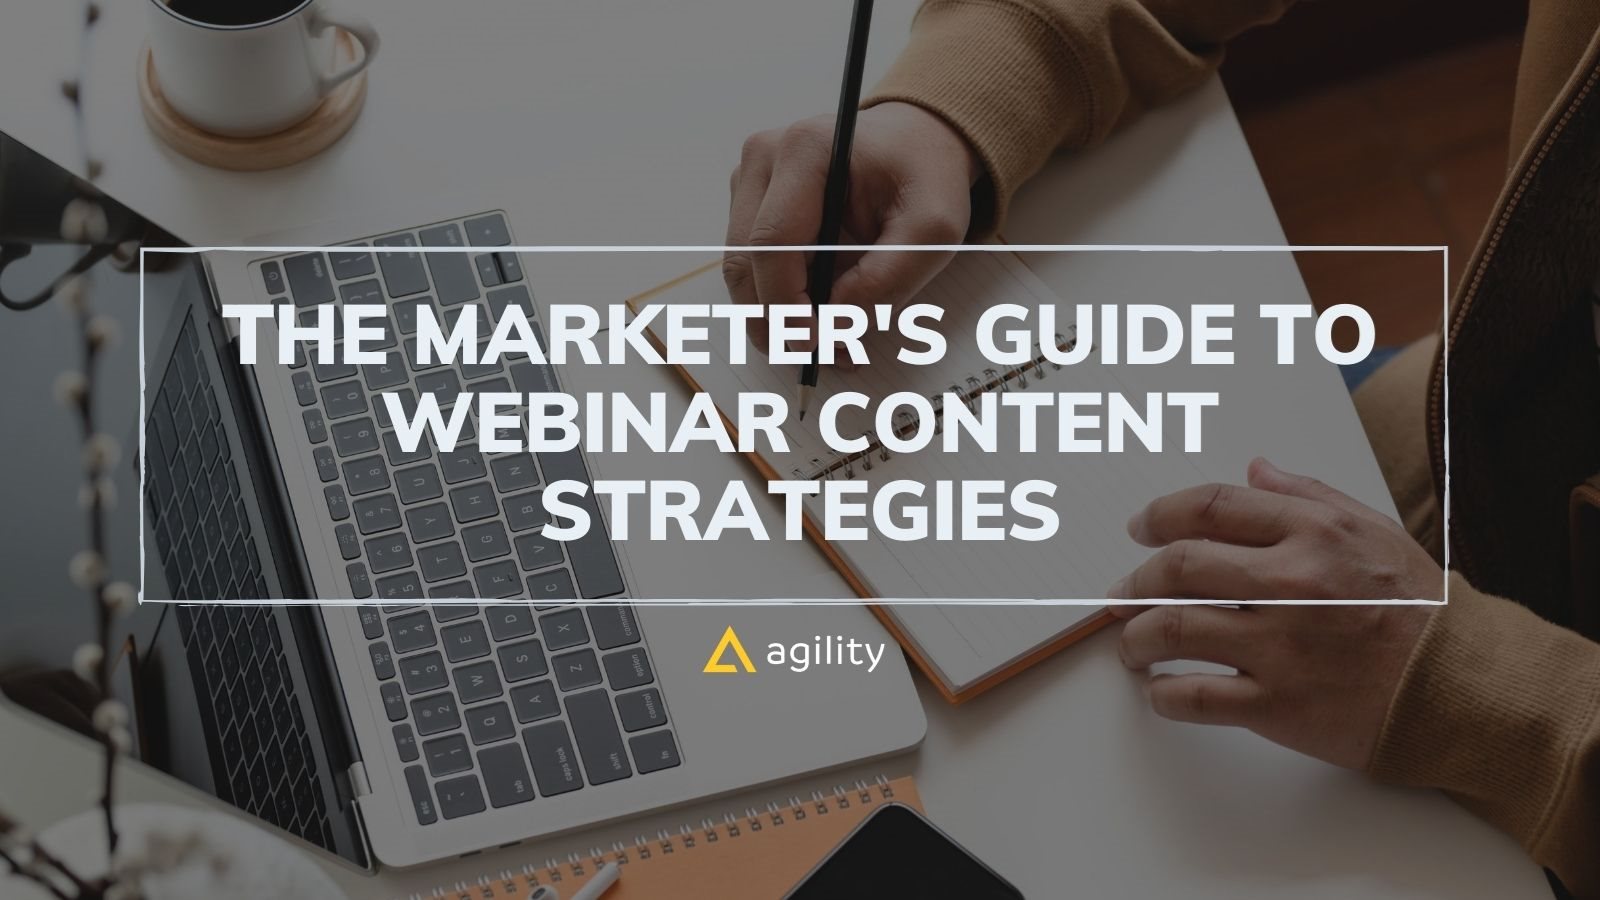 The Marketer's Guide to Webinar Content Strategies